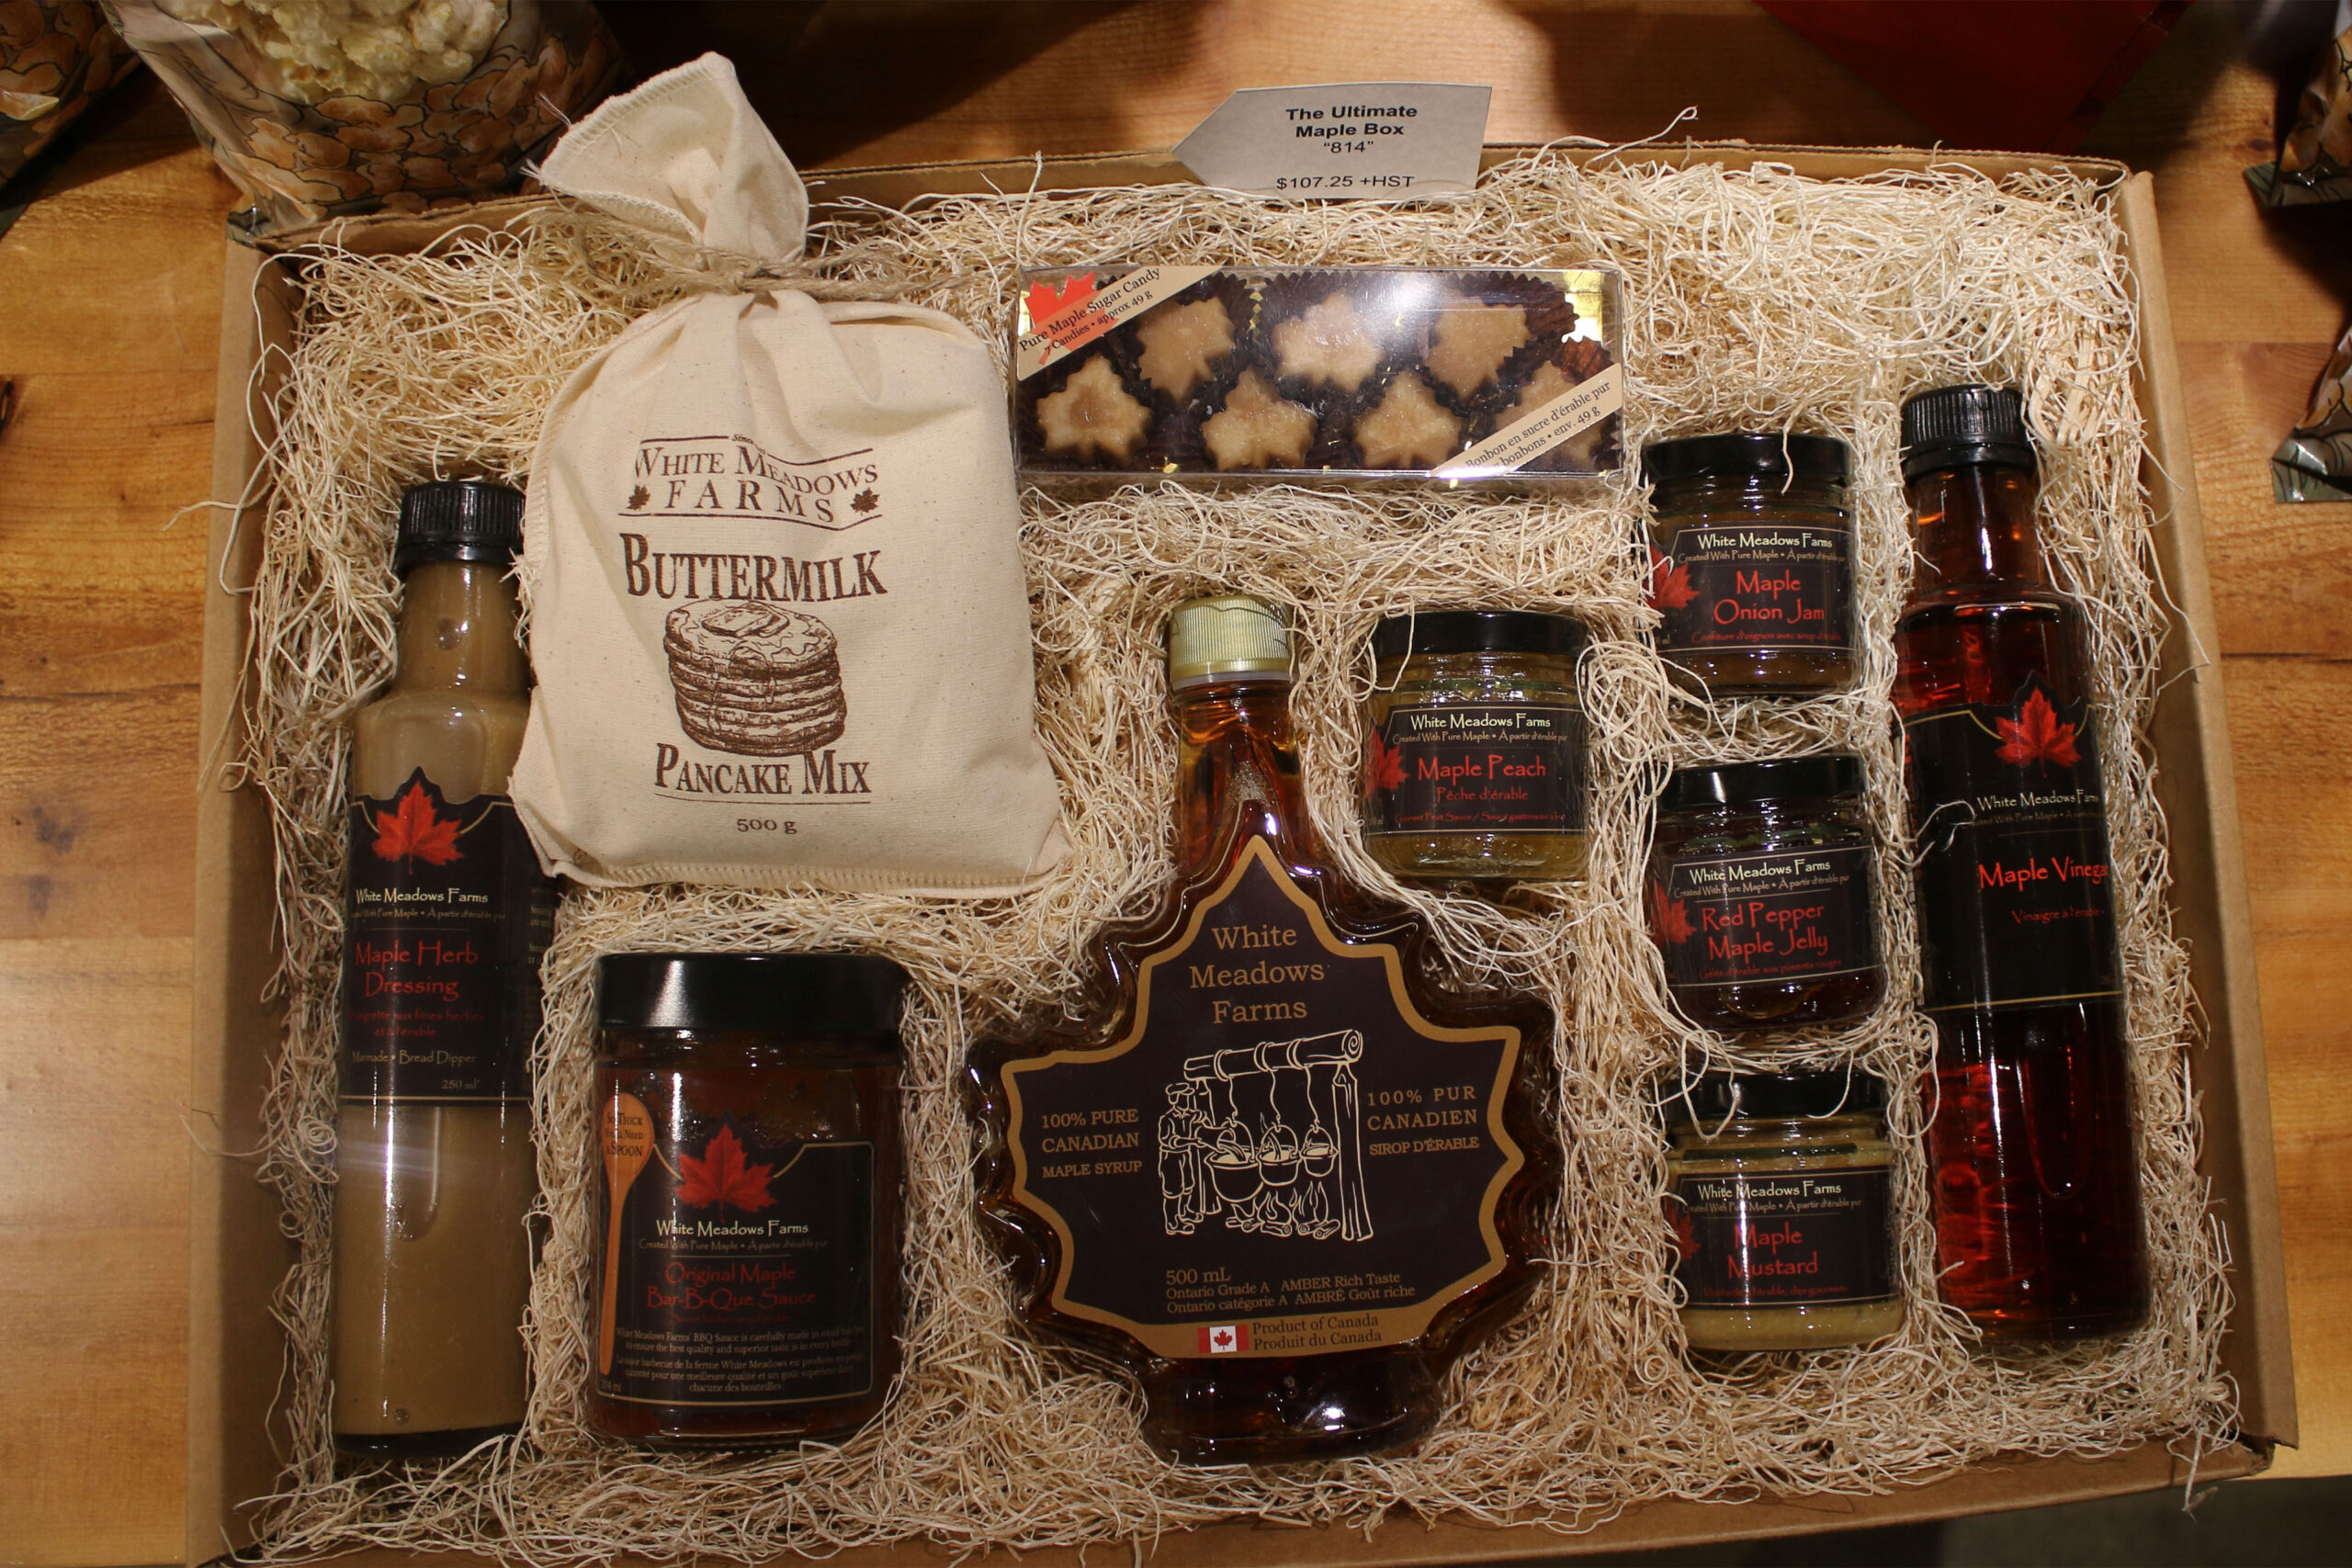 White Meadows Farms has embraced innovation and continues to introduce an eclectic range of maple-themed products. 